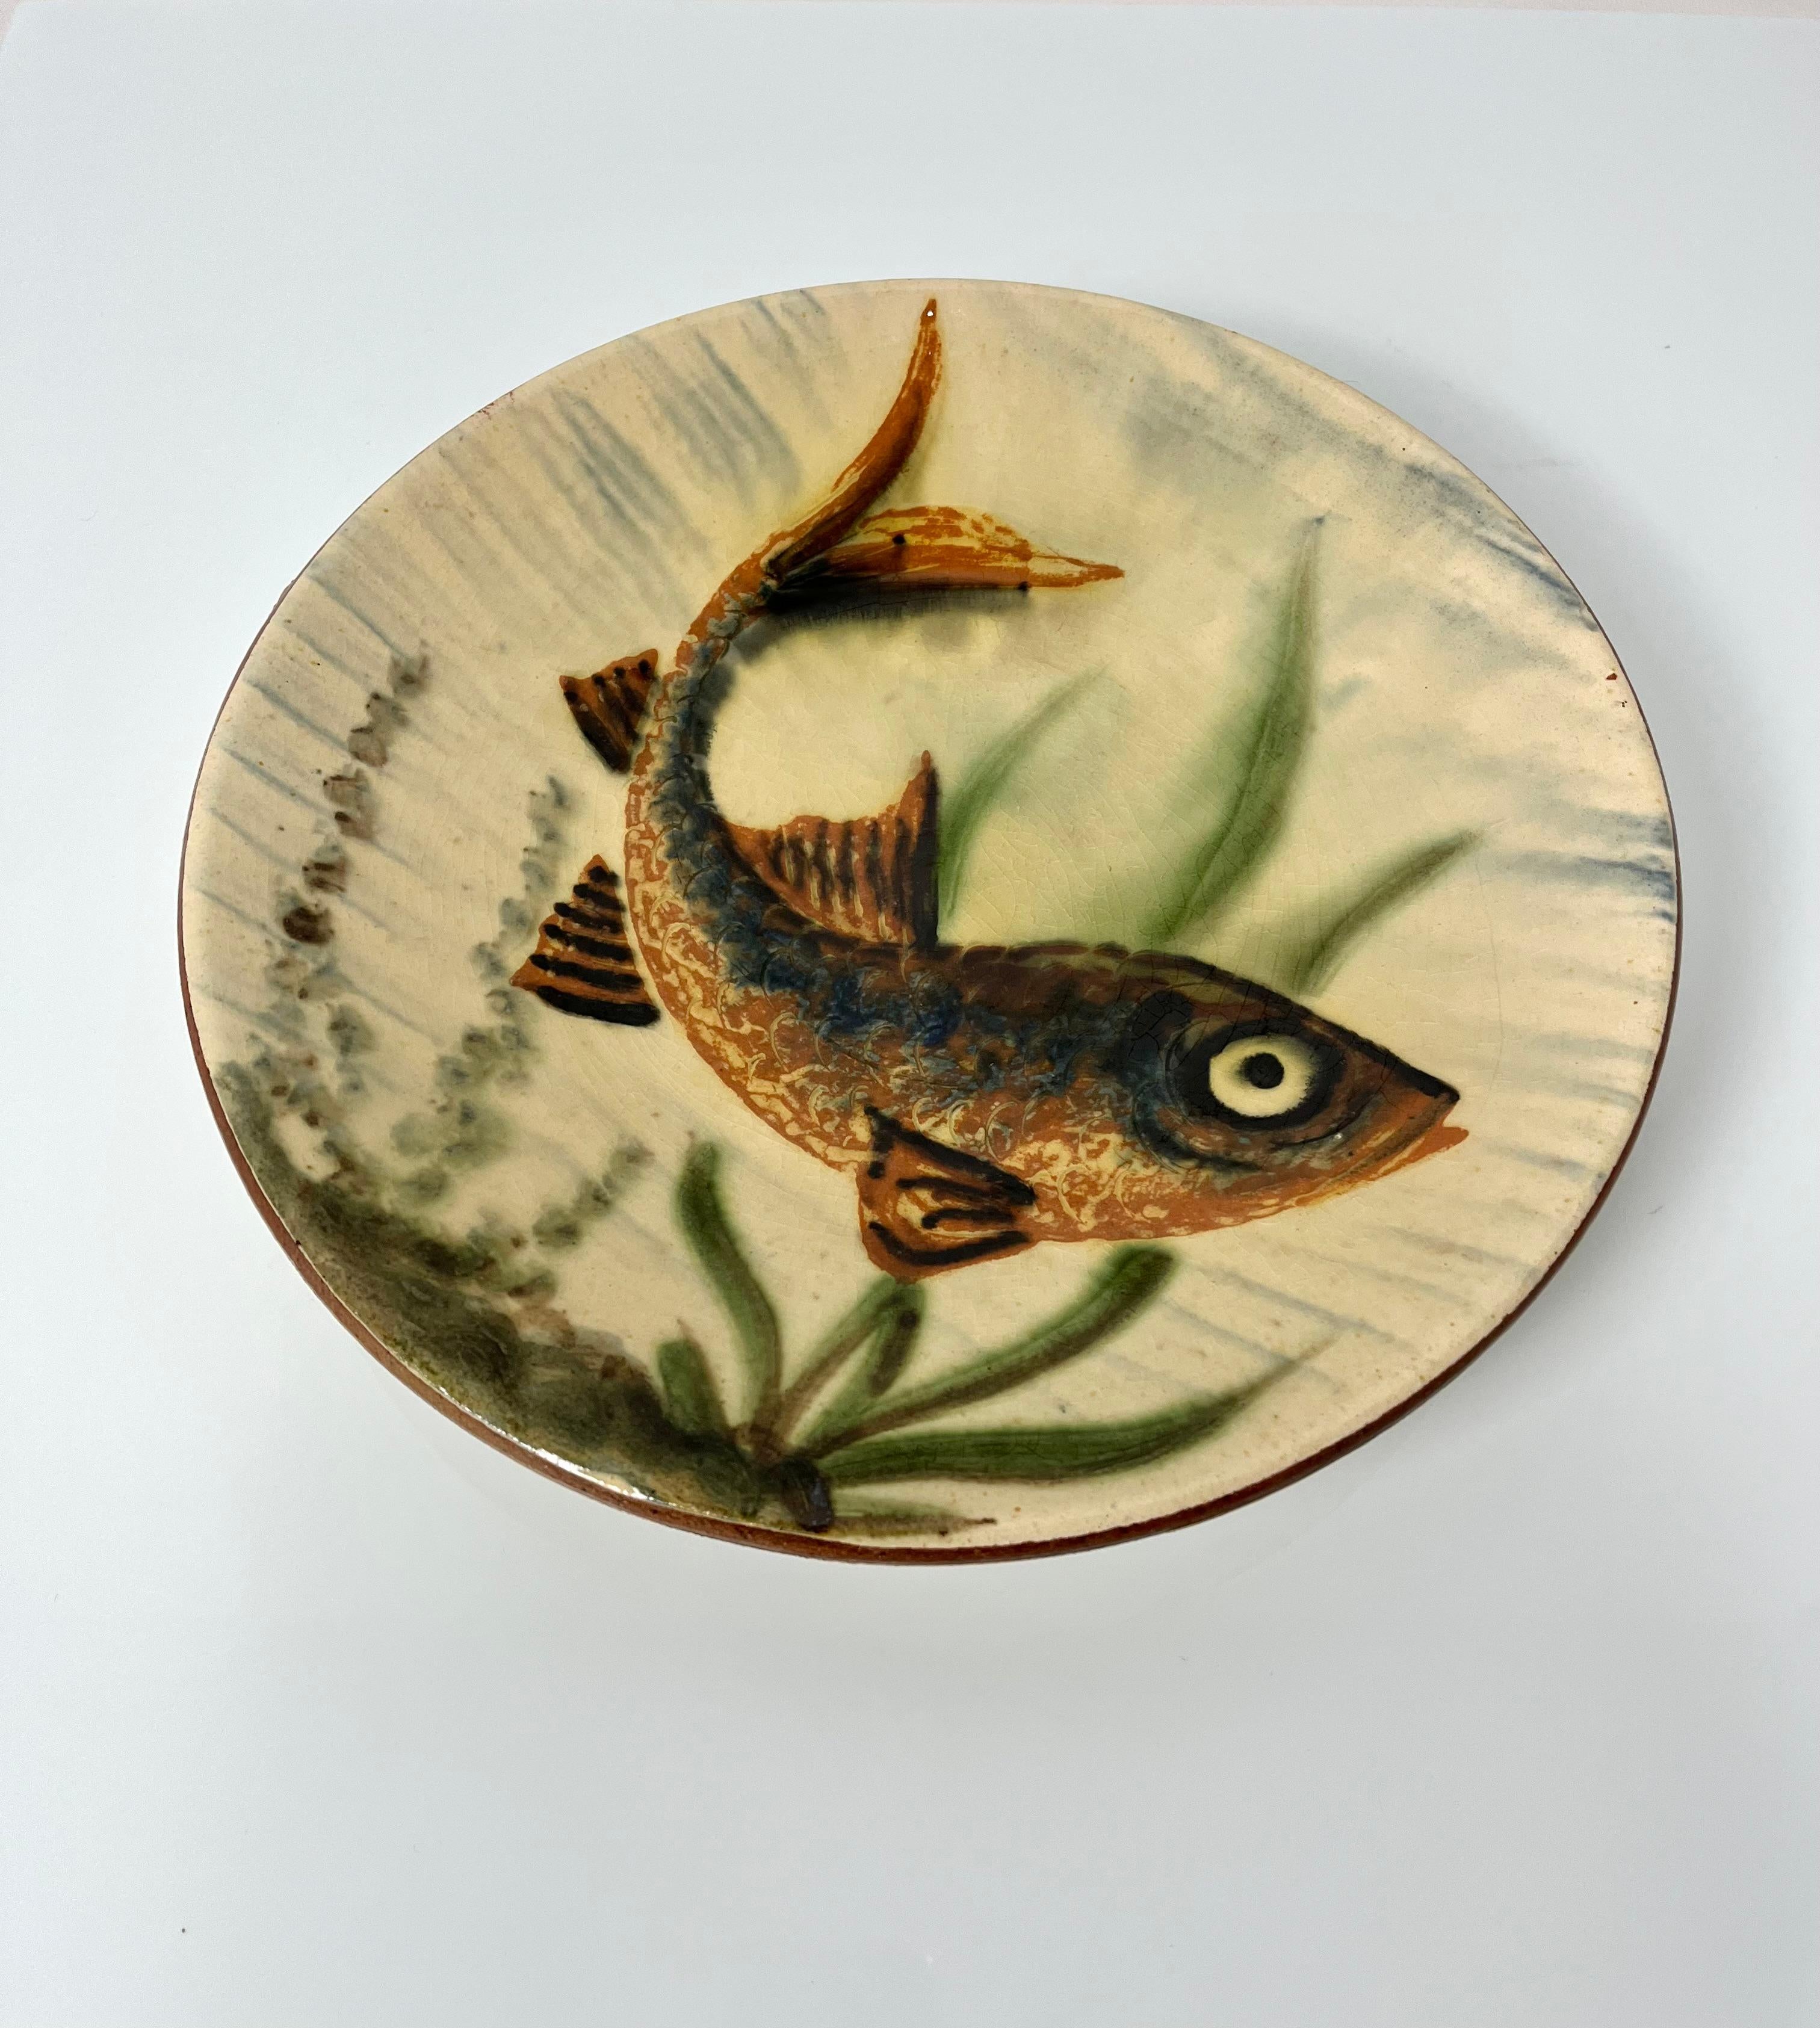 Decorative ceramic plate with fish decor by Puigdemont, Spain, 60’s
Can be hung on the wall
Signed below
